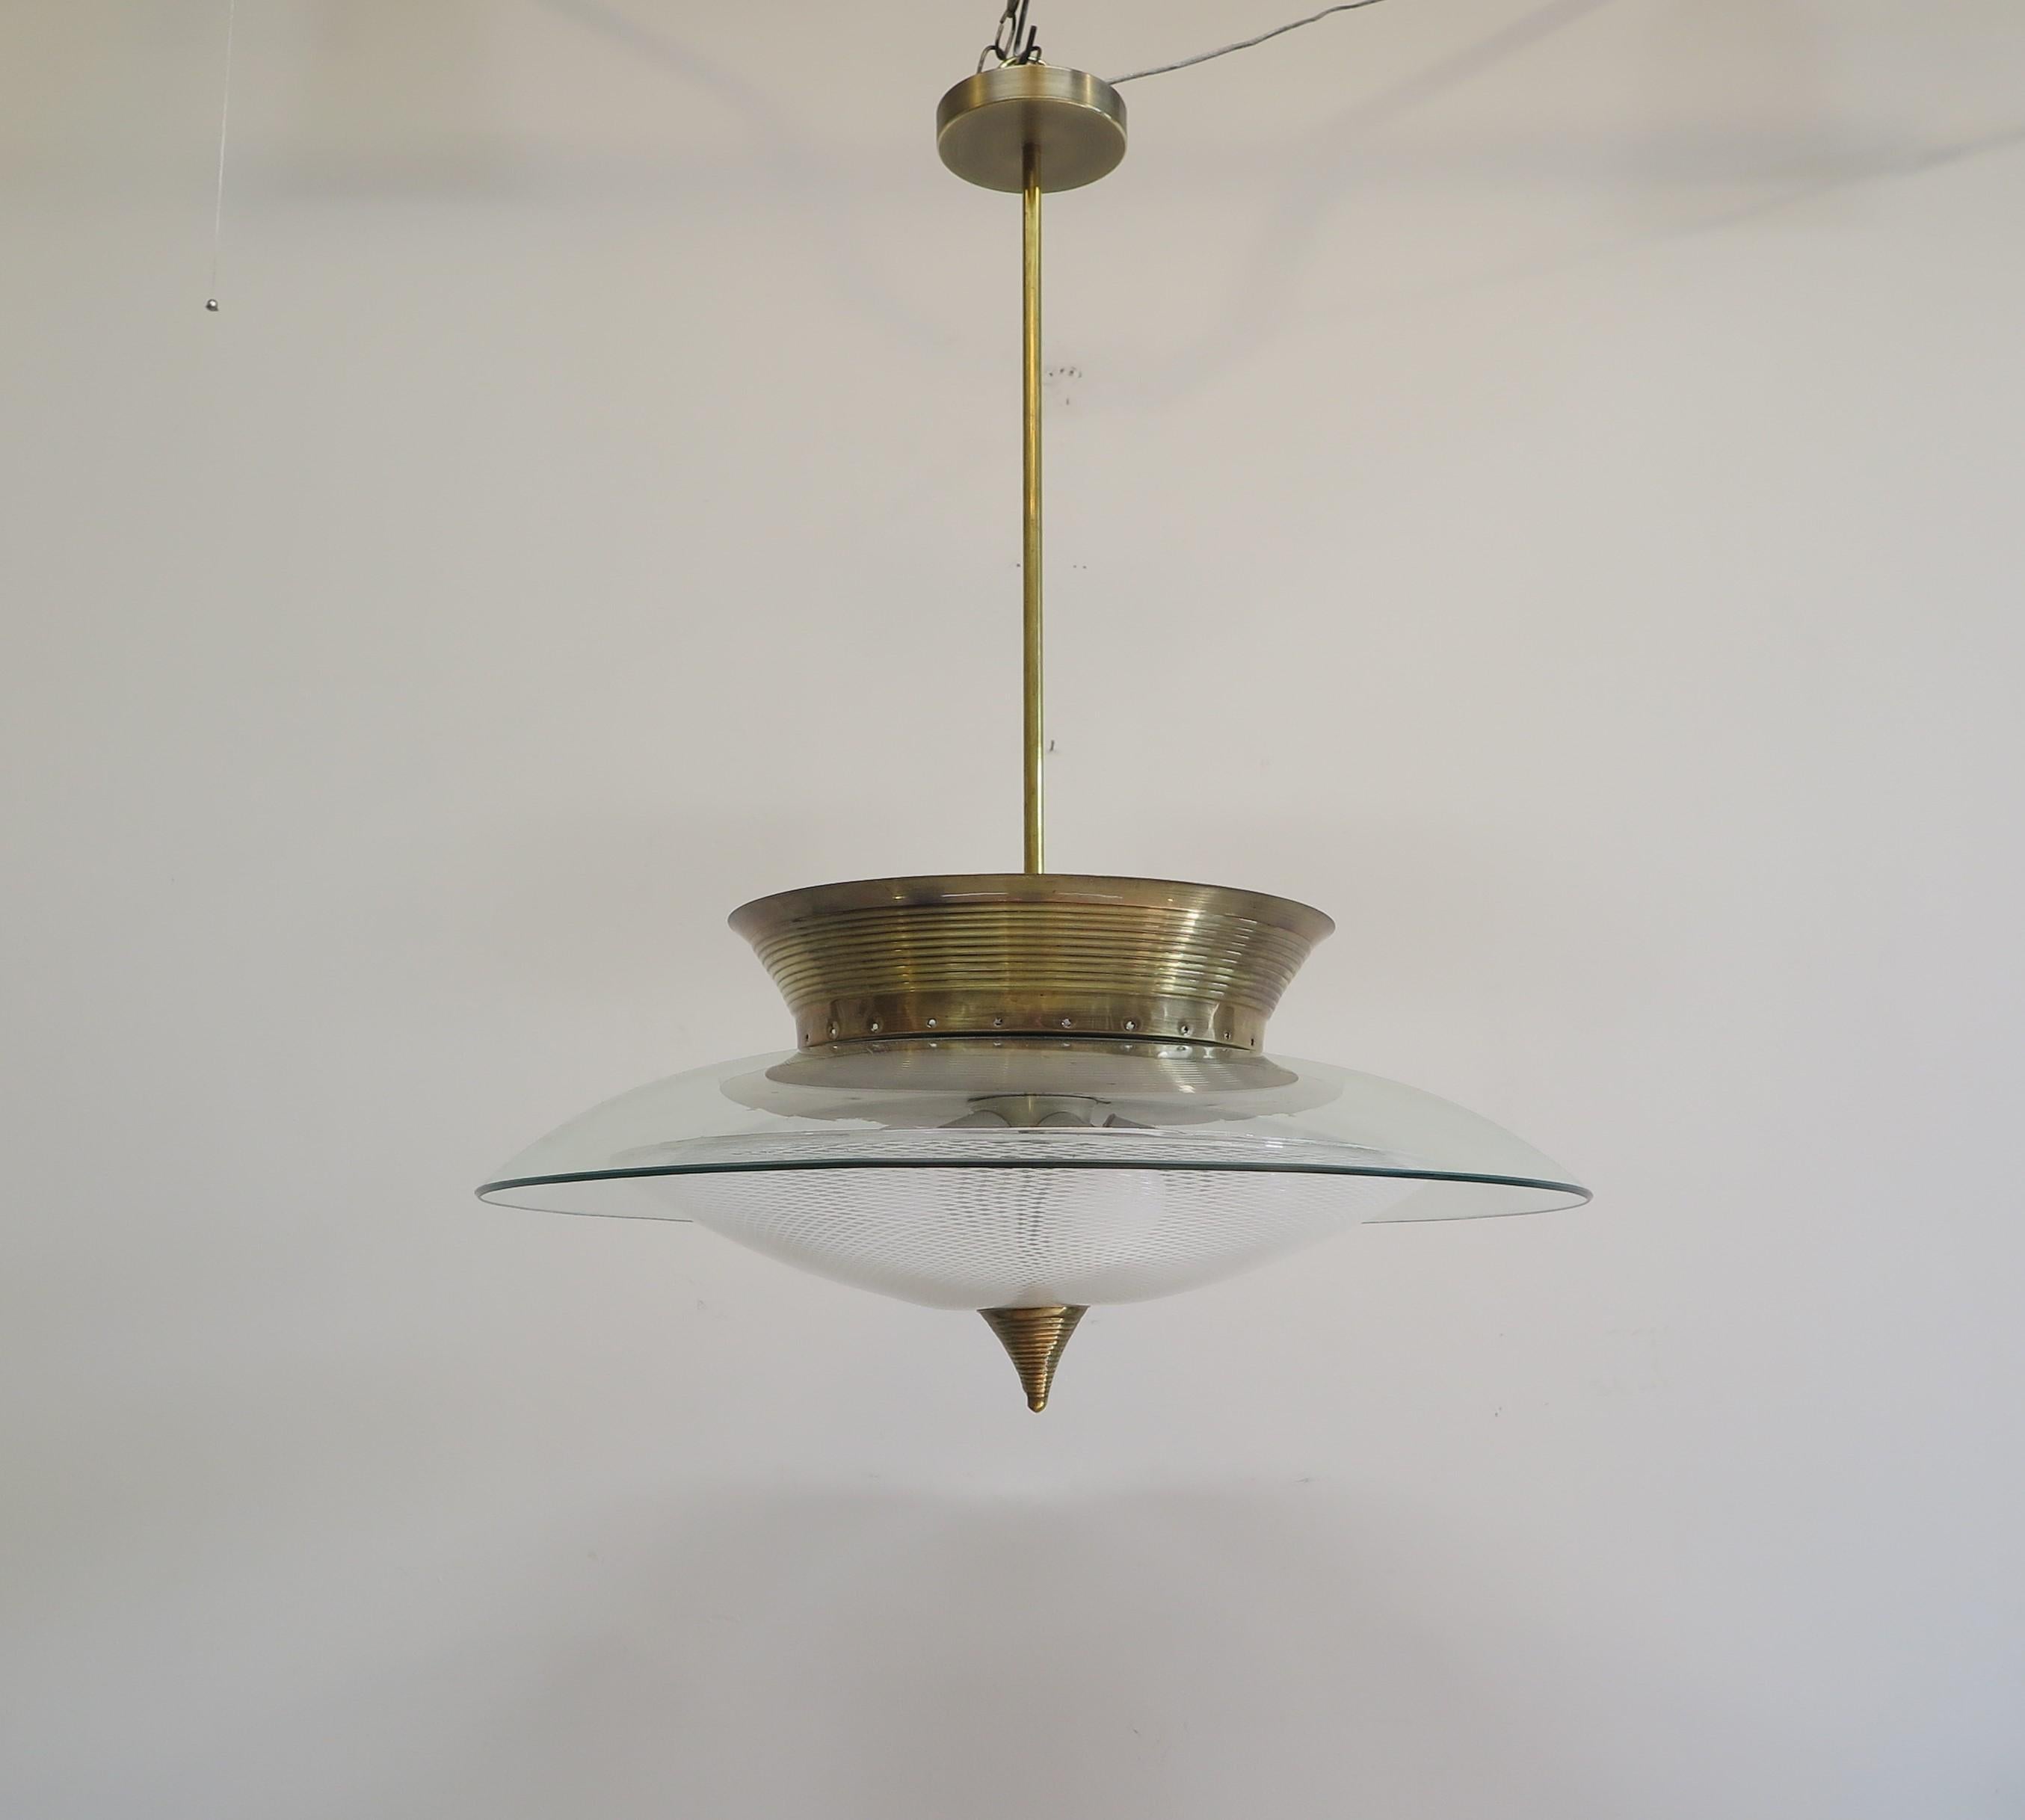 Italian Chandelier Pendant light attributed to Fontana Arte & Pietro Chiesa. Spectacular Pendant style chandelier having both upward and downward light. Sockets have been updated (the original sockets are available if desired). Solid brass spun